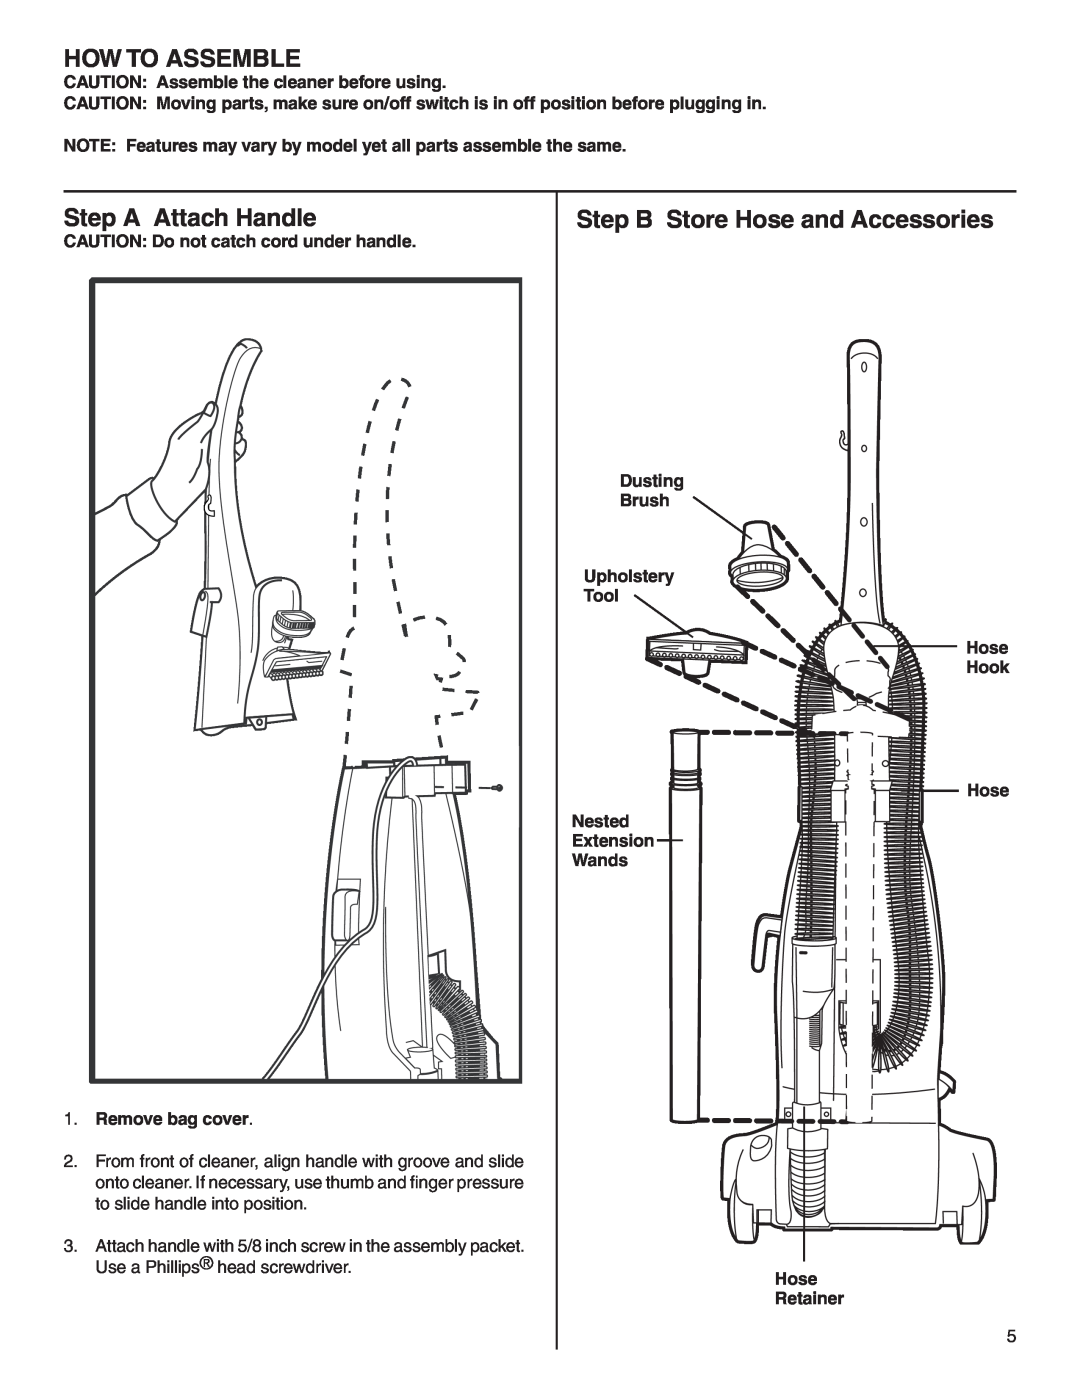 Electrolux Z2270-Z2290 Series manual How To Assemble, Step A Attach Handle, Step B Store Hose and Accessories 